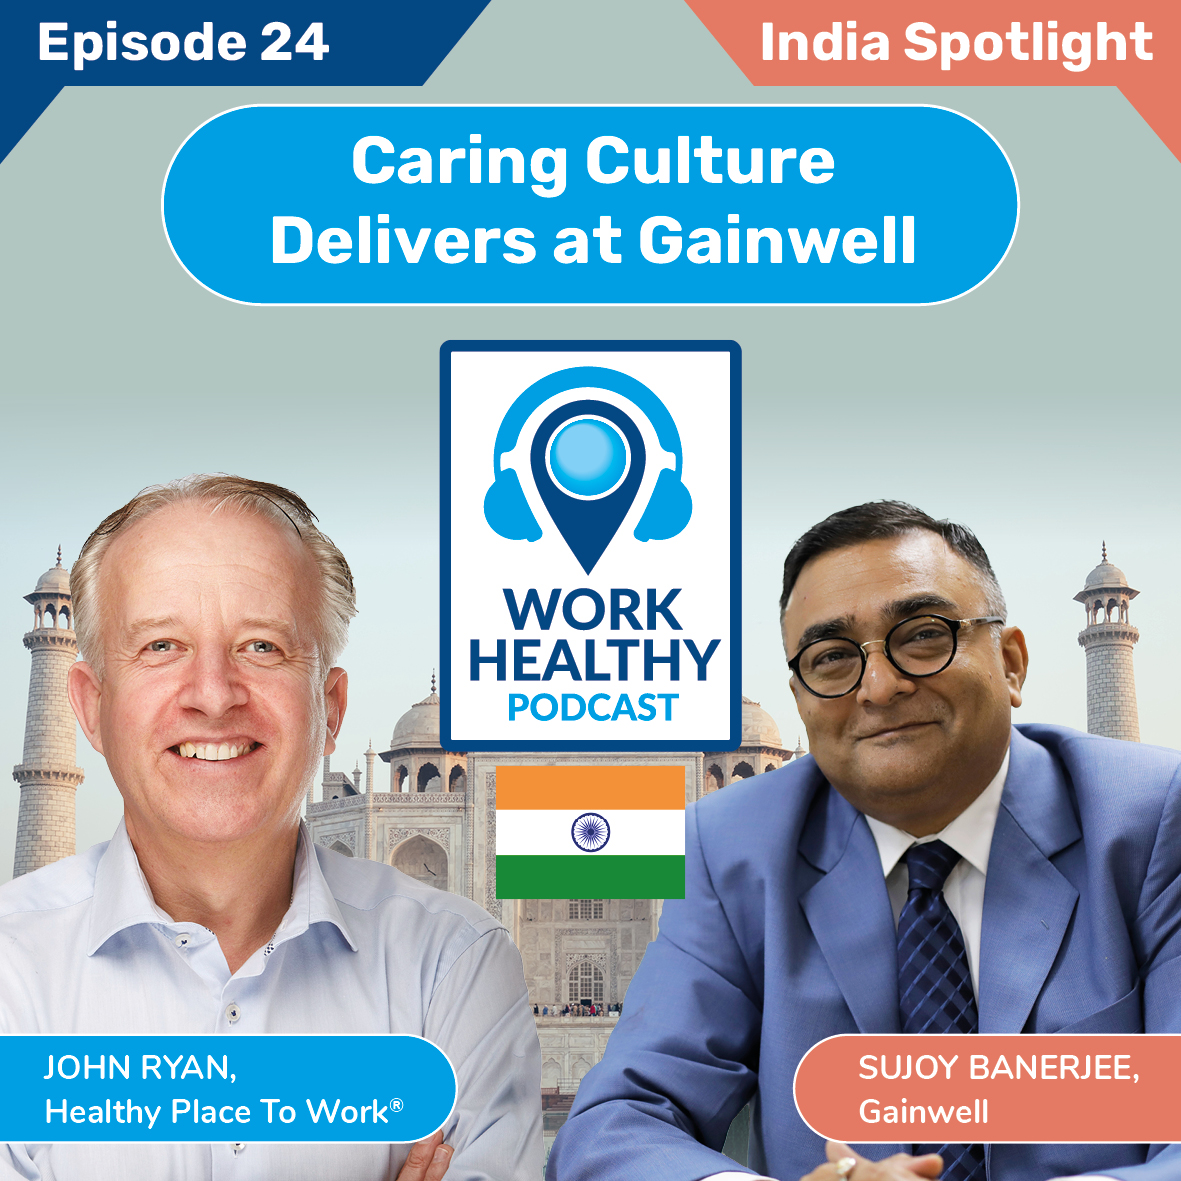 Caring Culture Delivers at Gainwell